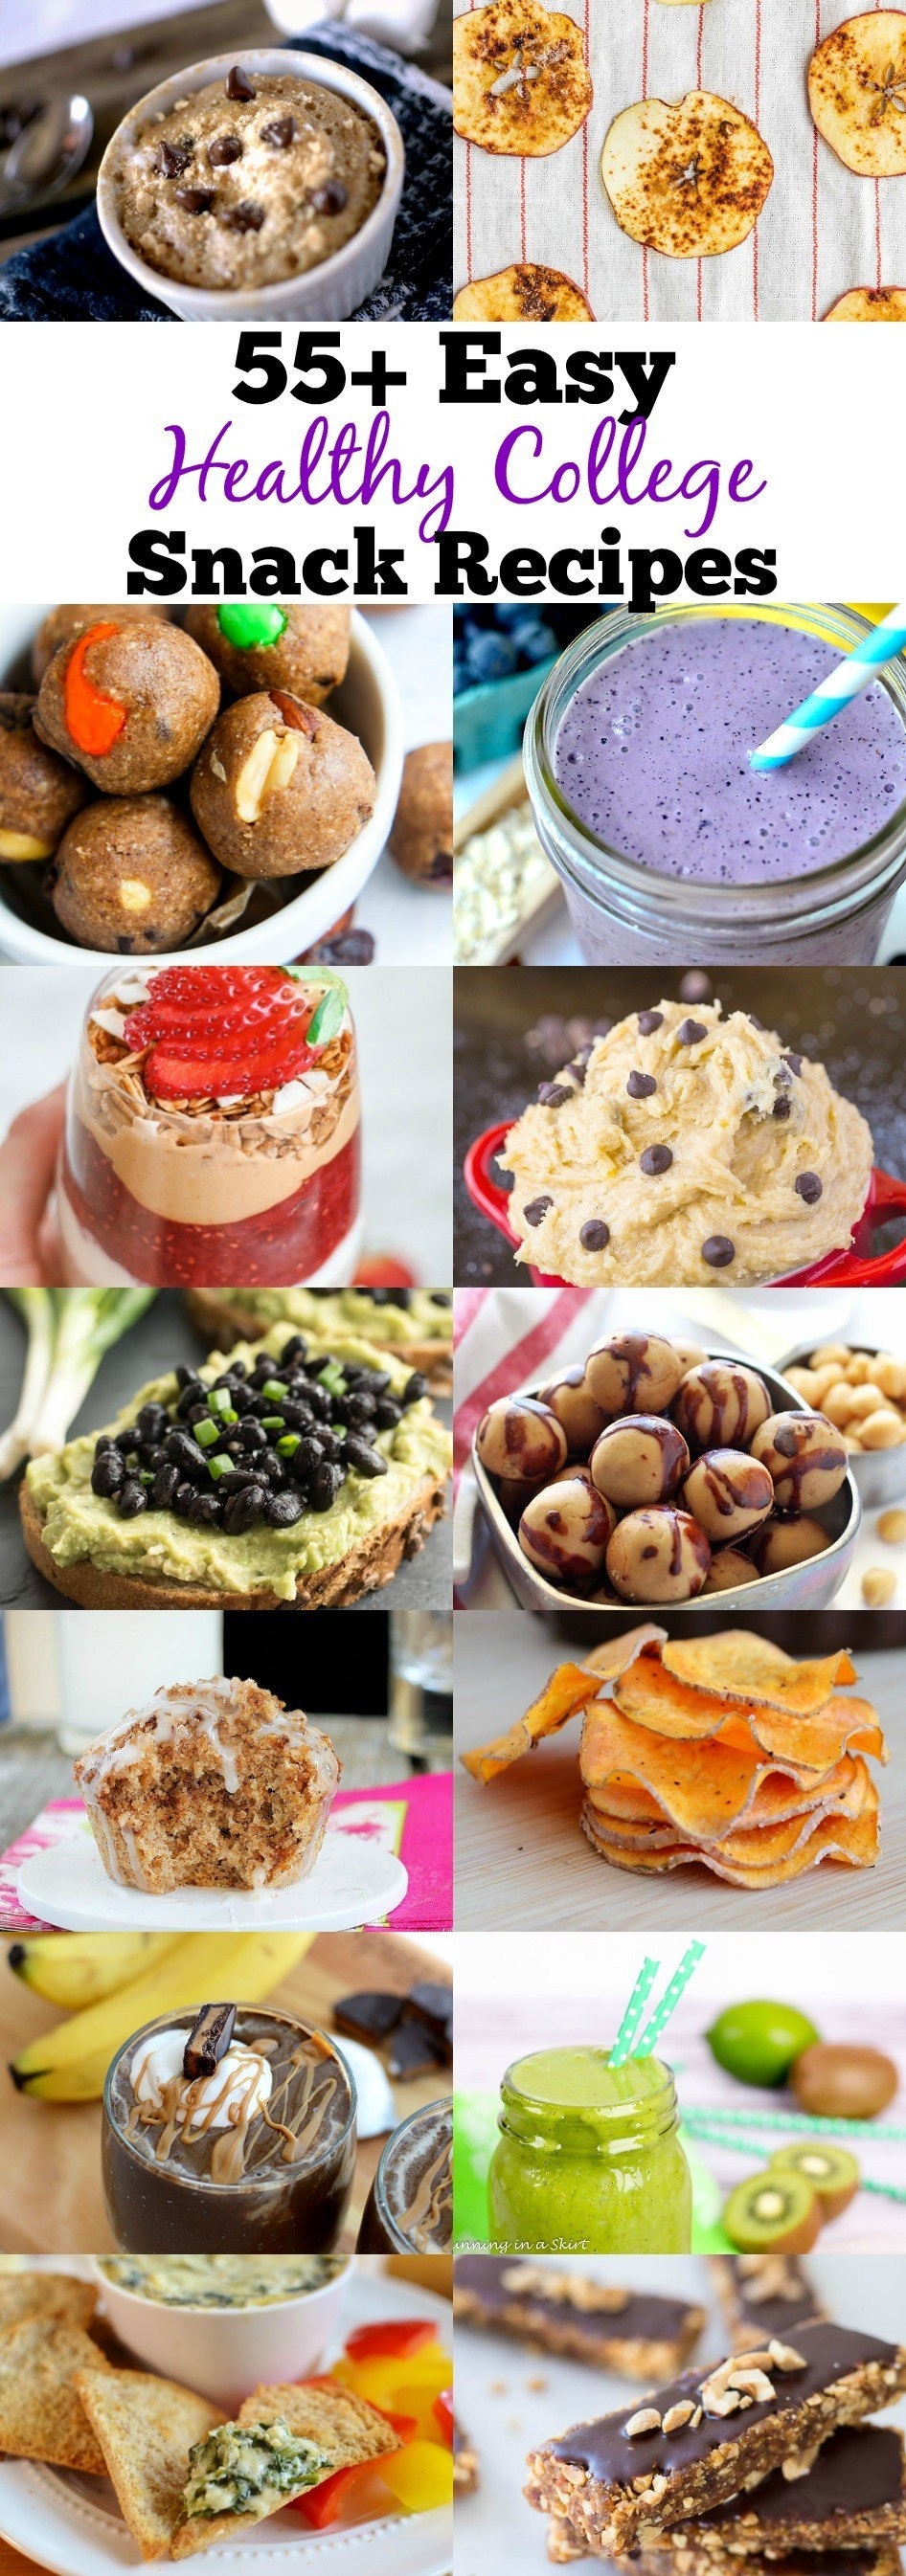 Healthy Dorm Room Snacks
 55 Healthy College Snack Recipes That Can Be Made In a